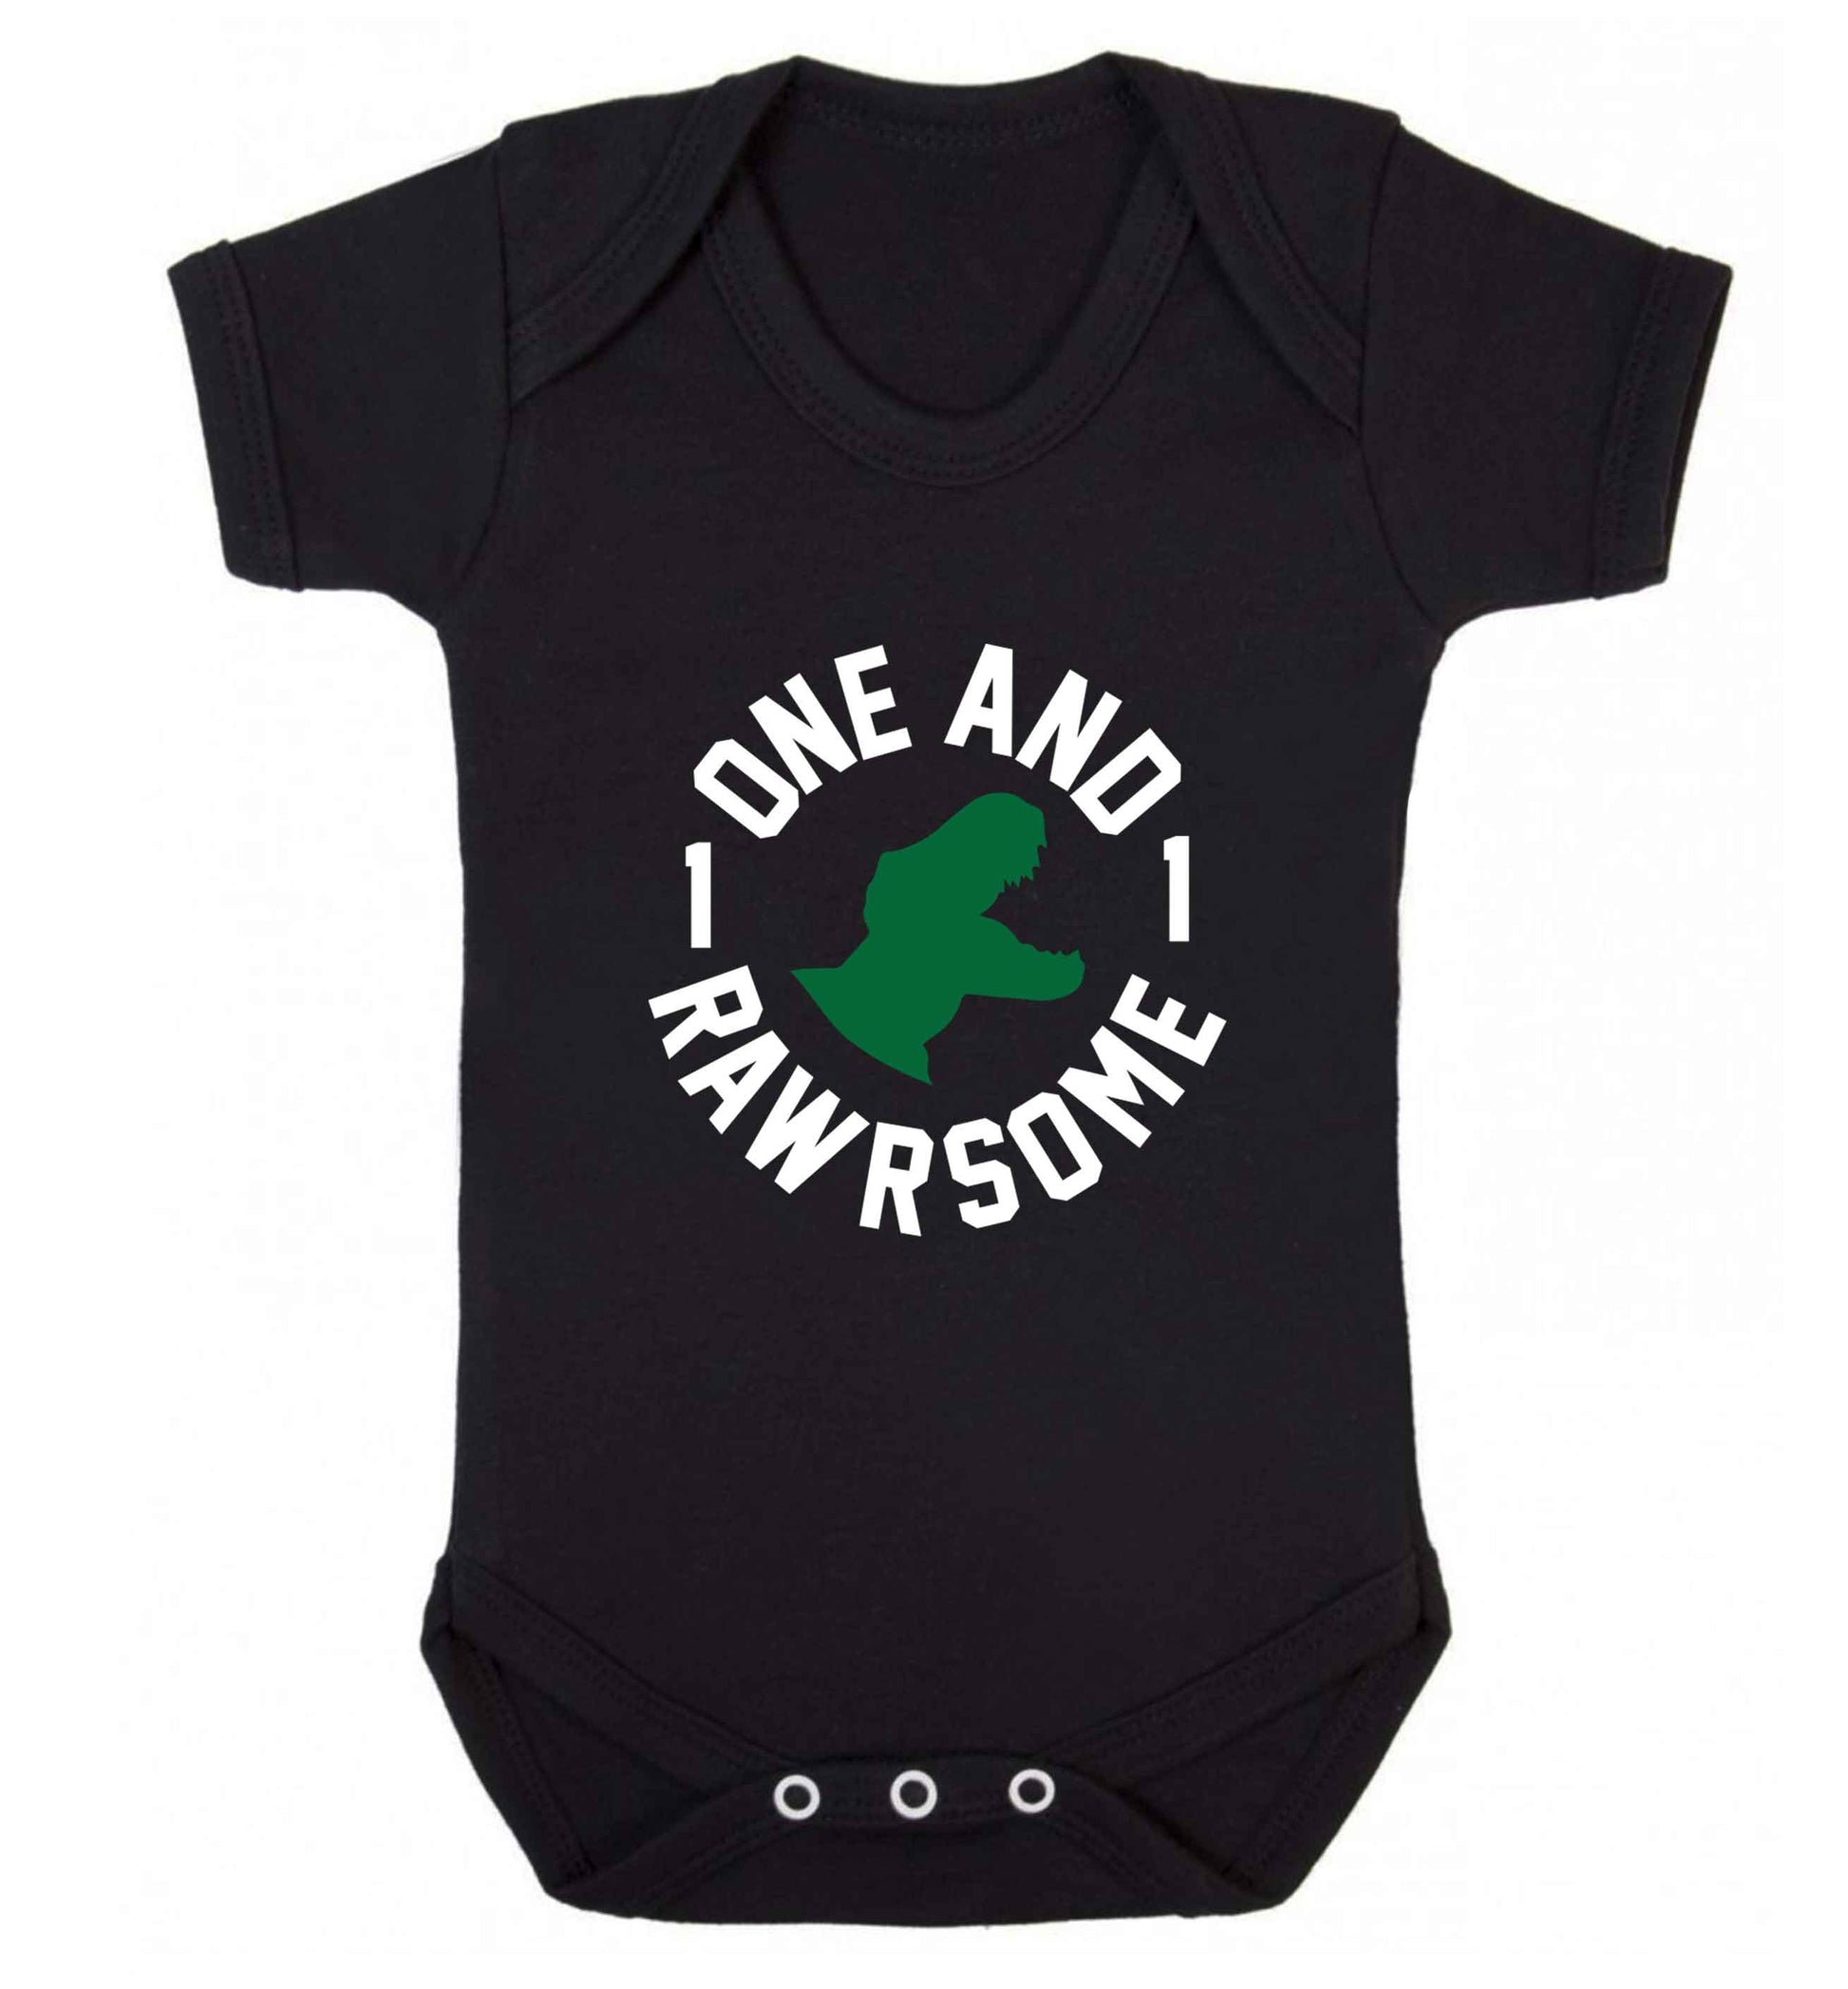 One and Rawrsome baby vest black 18-24 months